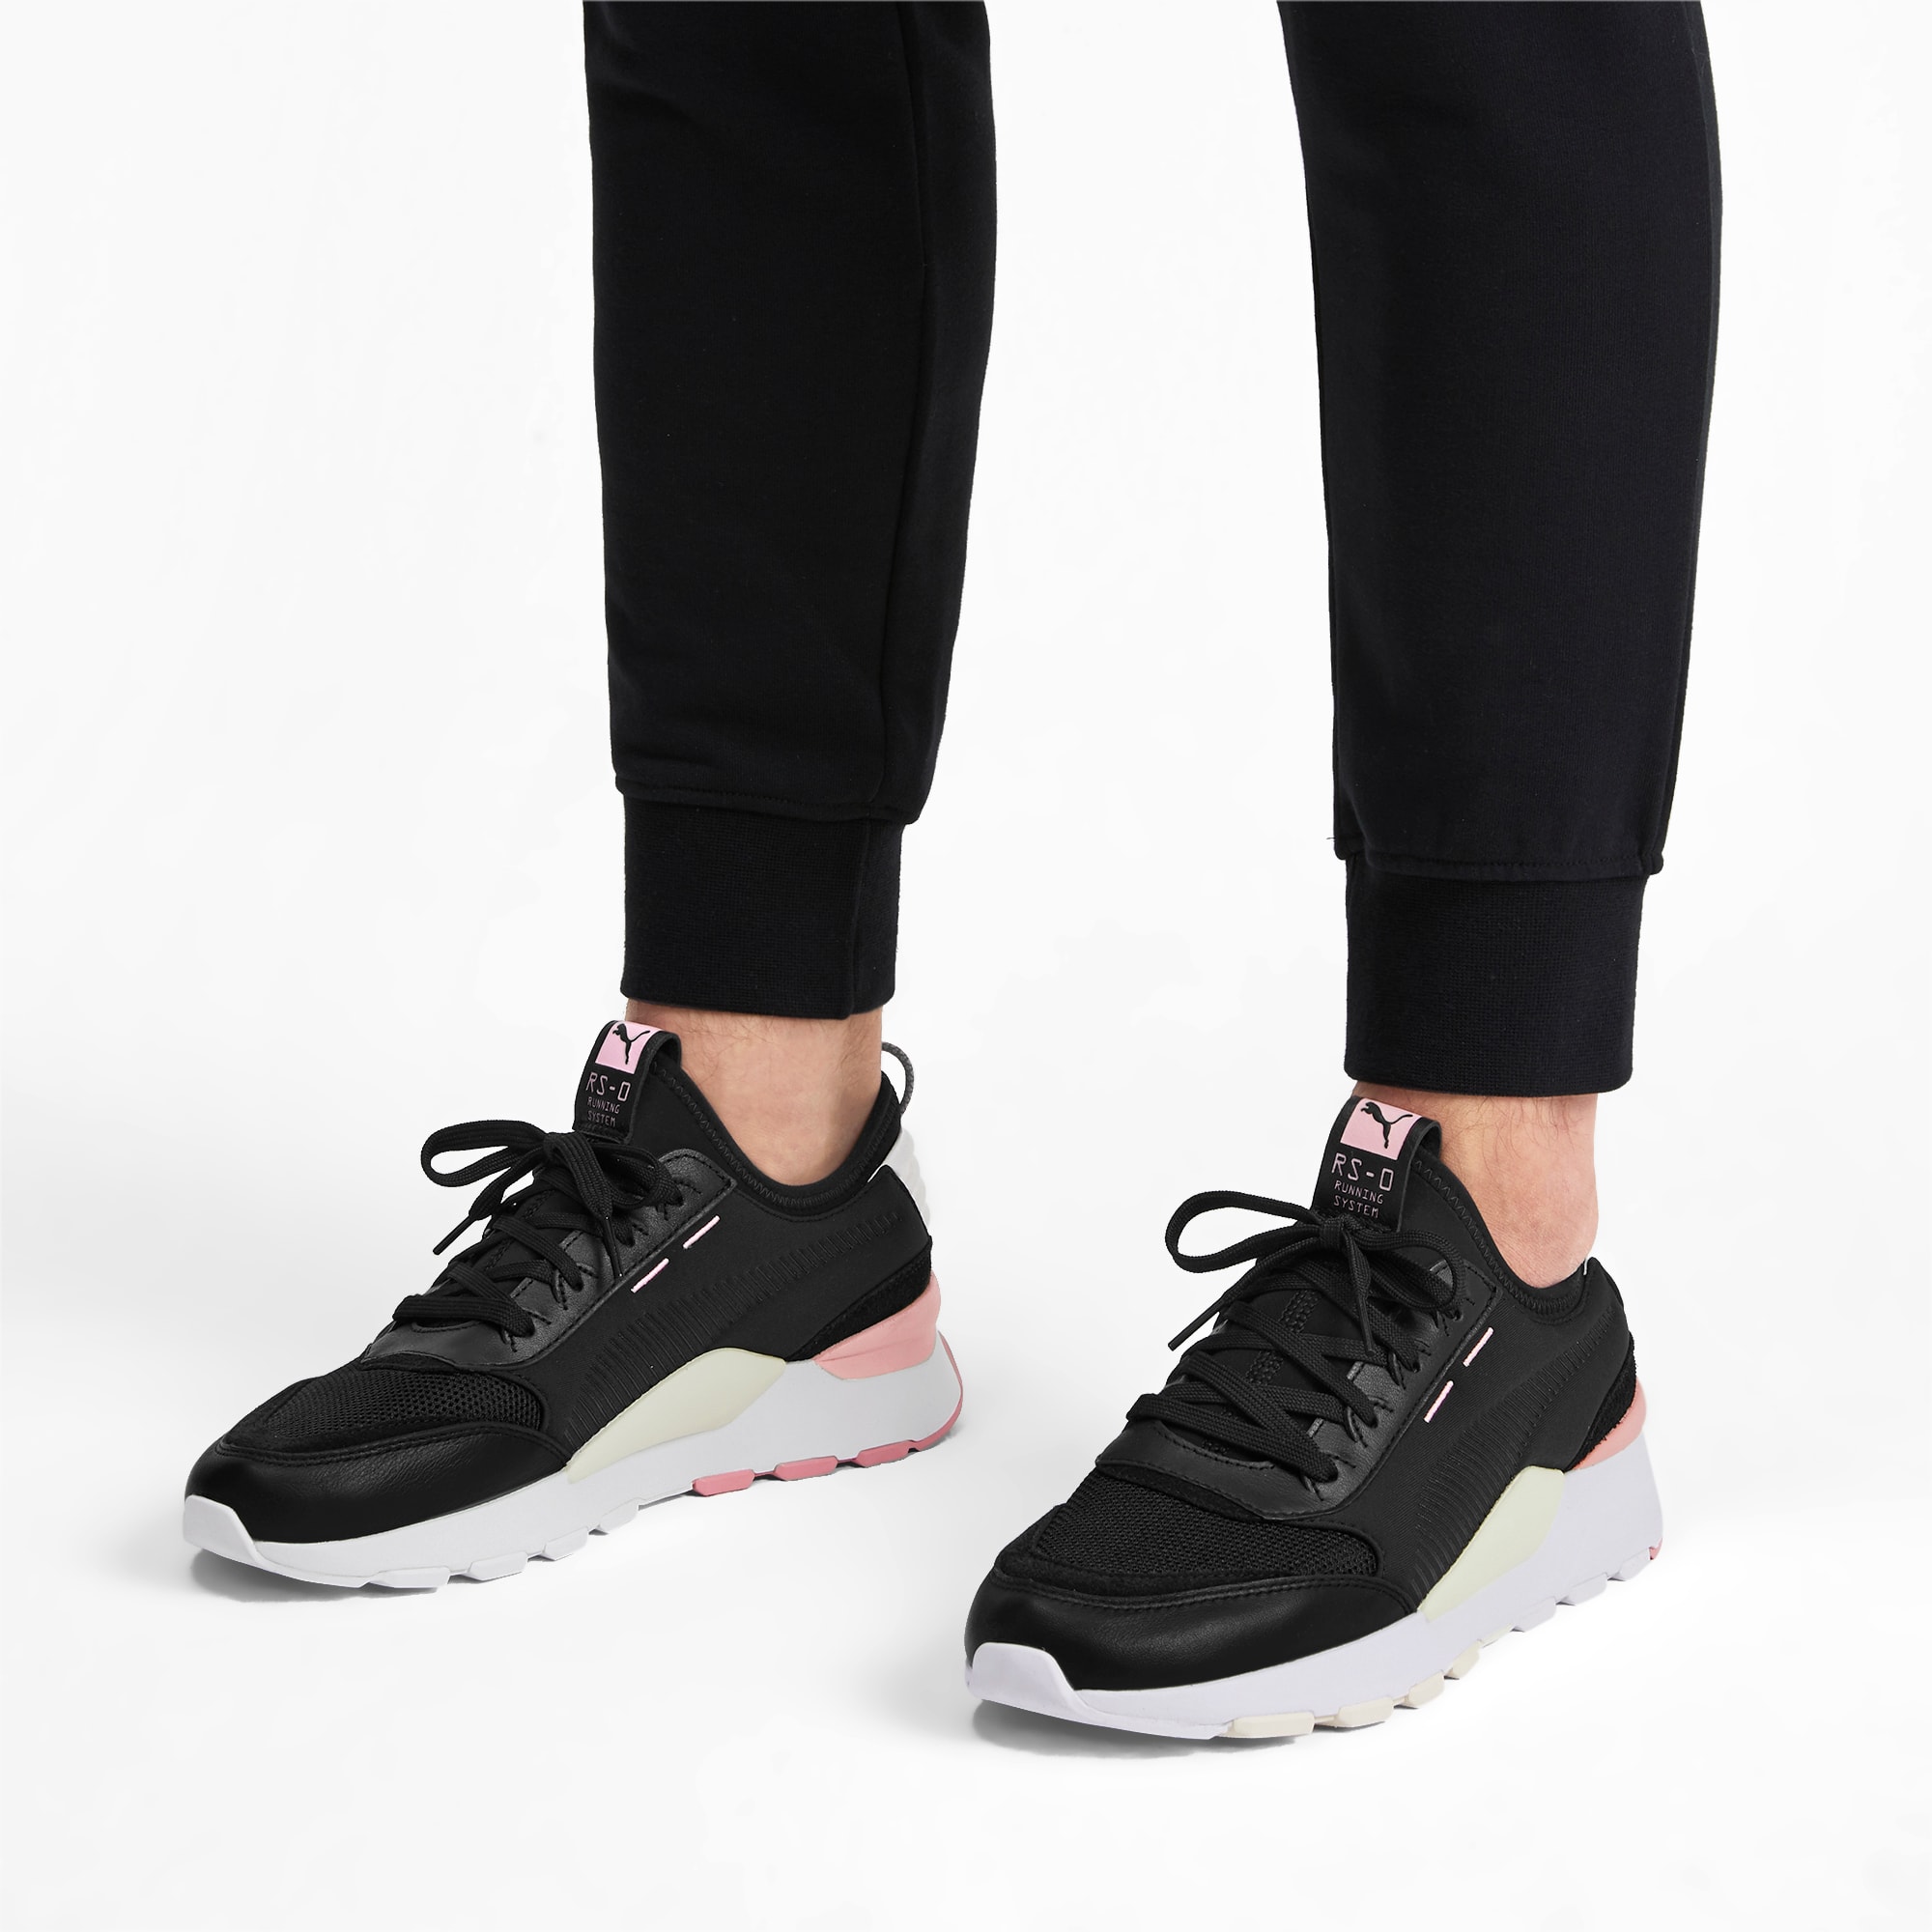 puma rs 0 outfit